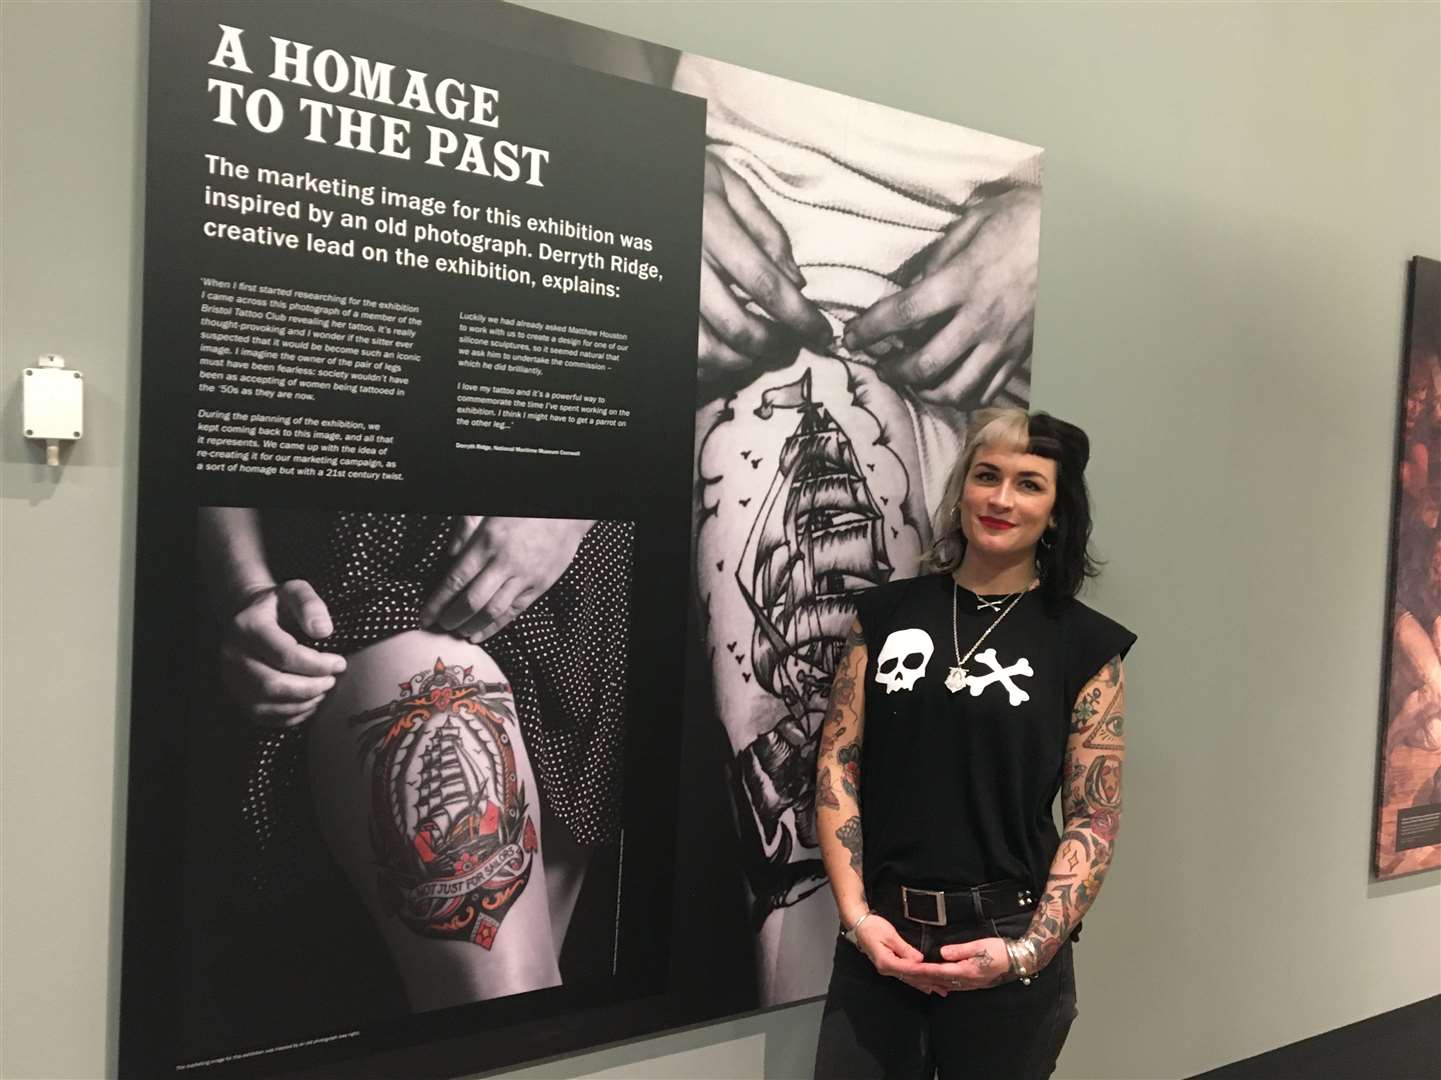 Co-curator of the British Tattoo Art Revealed exhibition Derryth Ridge was all ready for it to open when lockdown happened